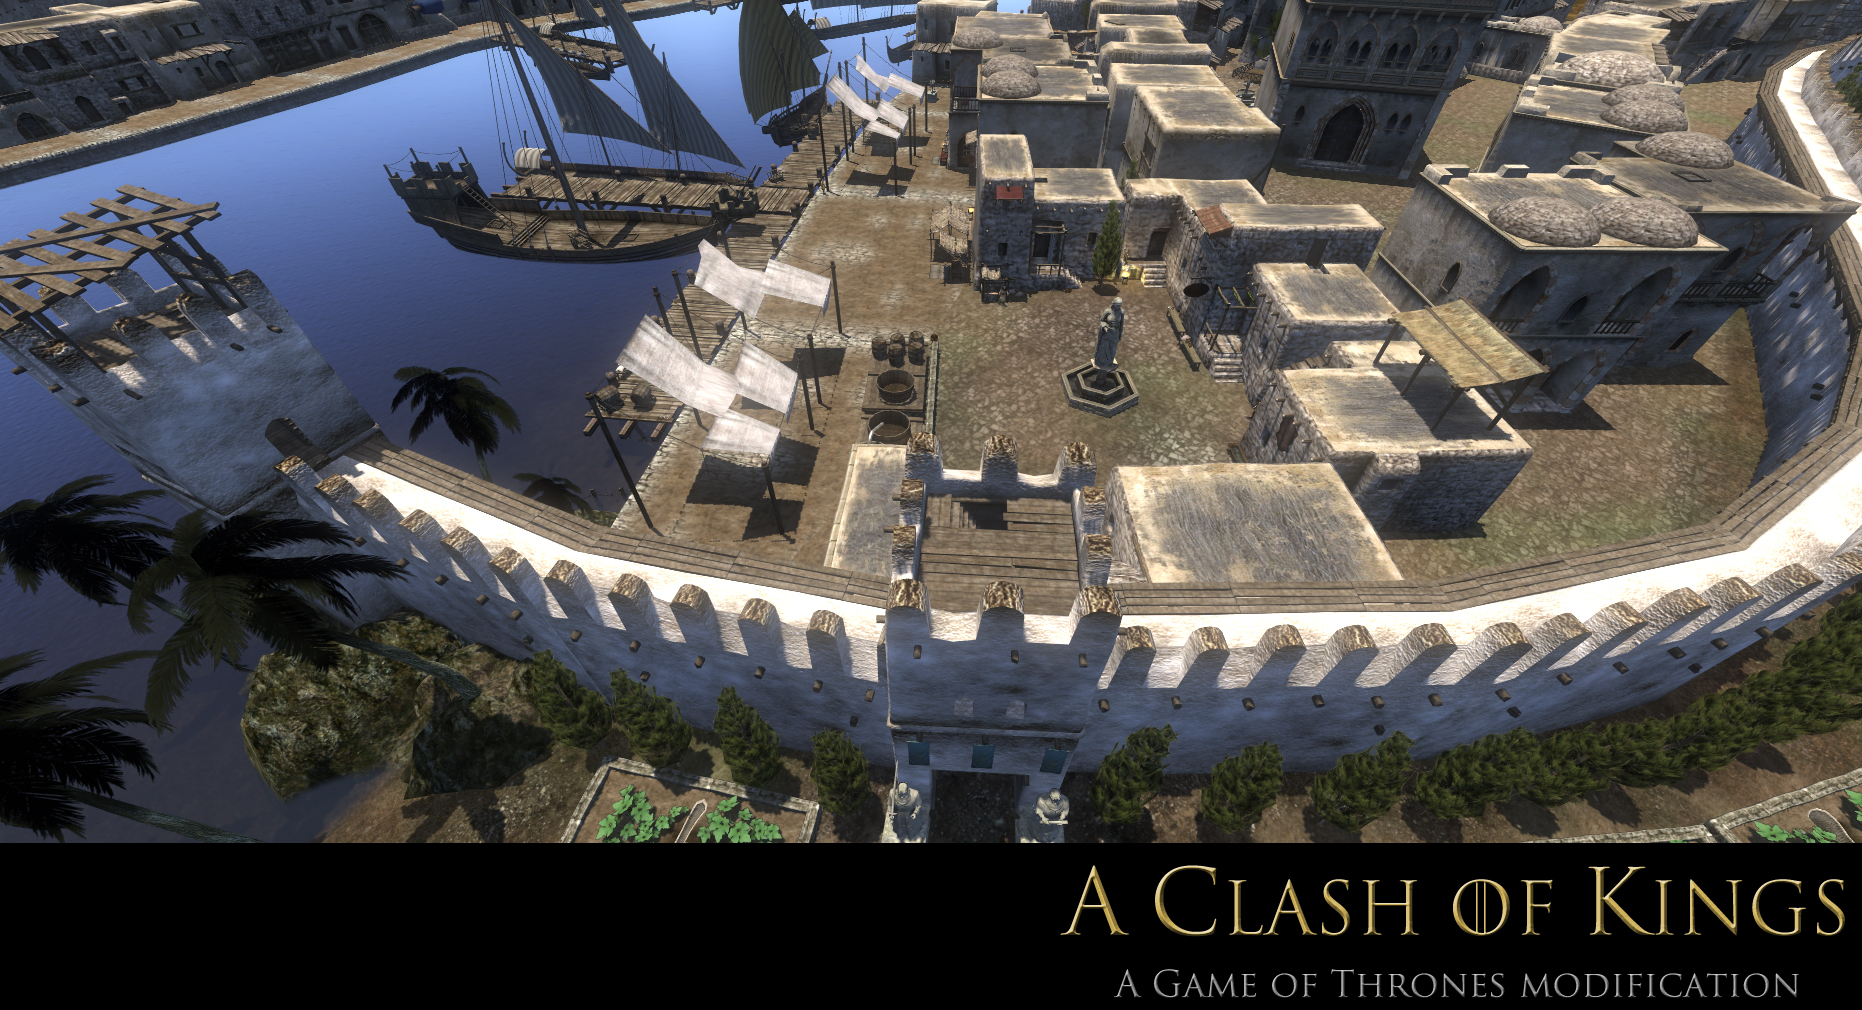 Volantis image - A Clash of Kings (Game of Thrones) mod for Mount & Bla...